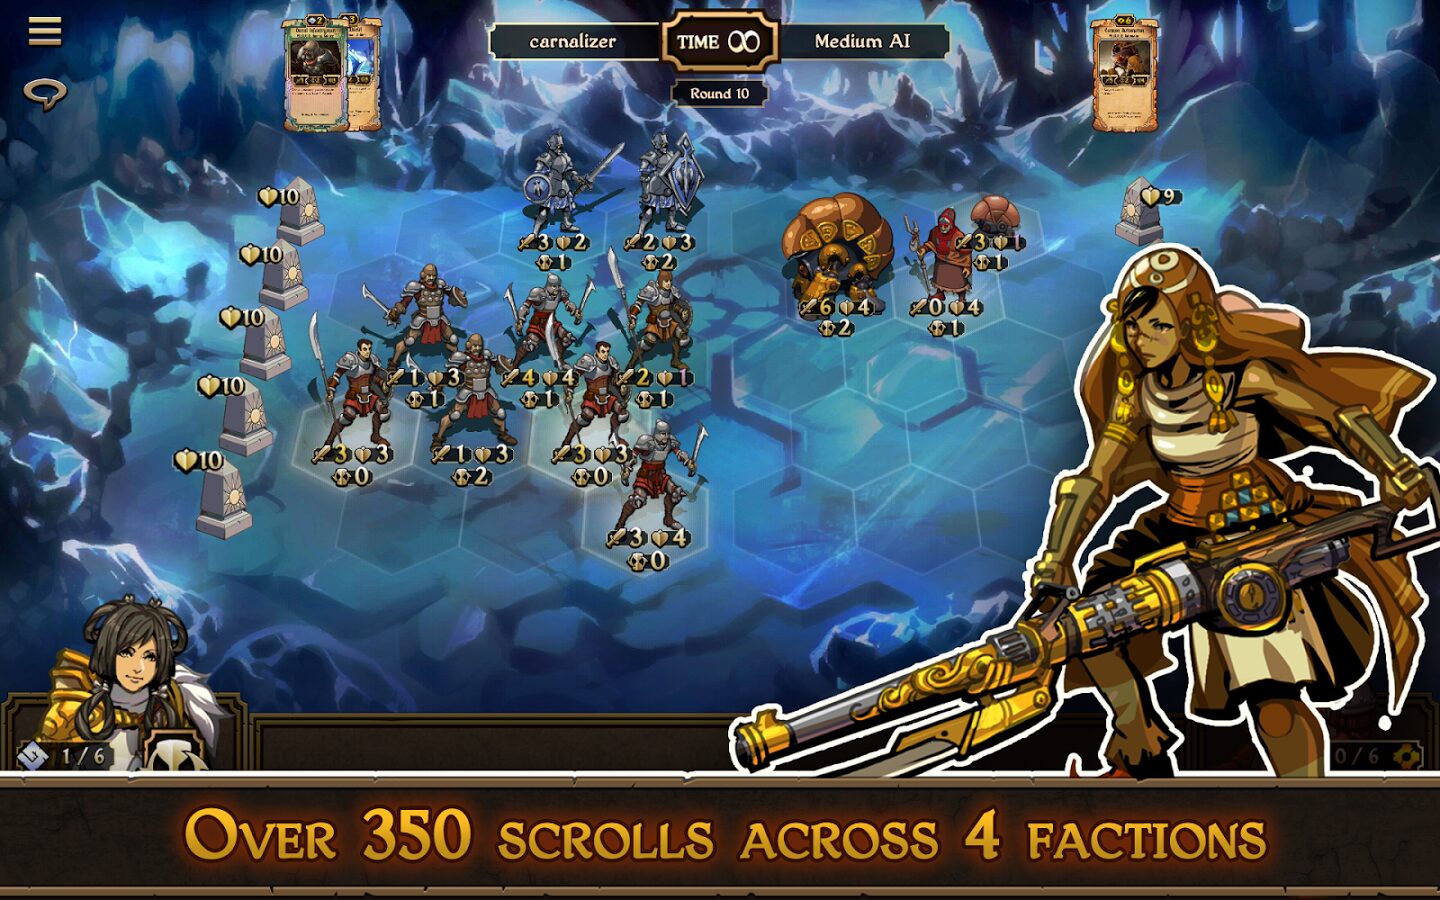 Derniers Jeux Android : Scrolls, Corto Maltese, Pixel Boat Rush, … Jeux Android